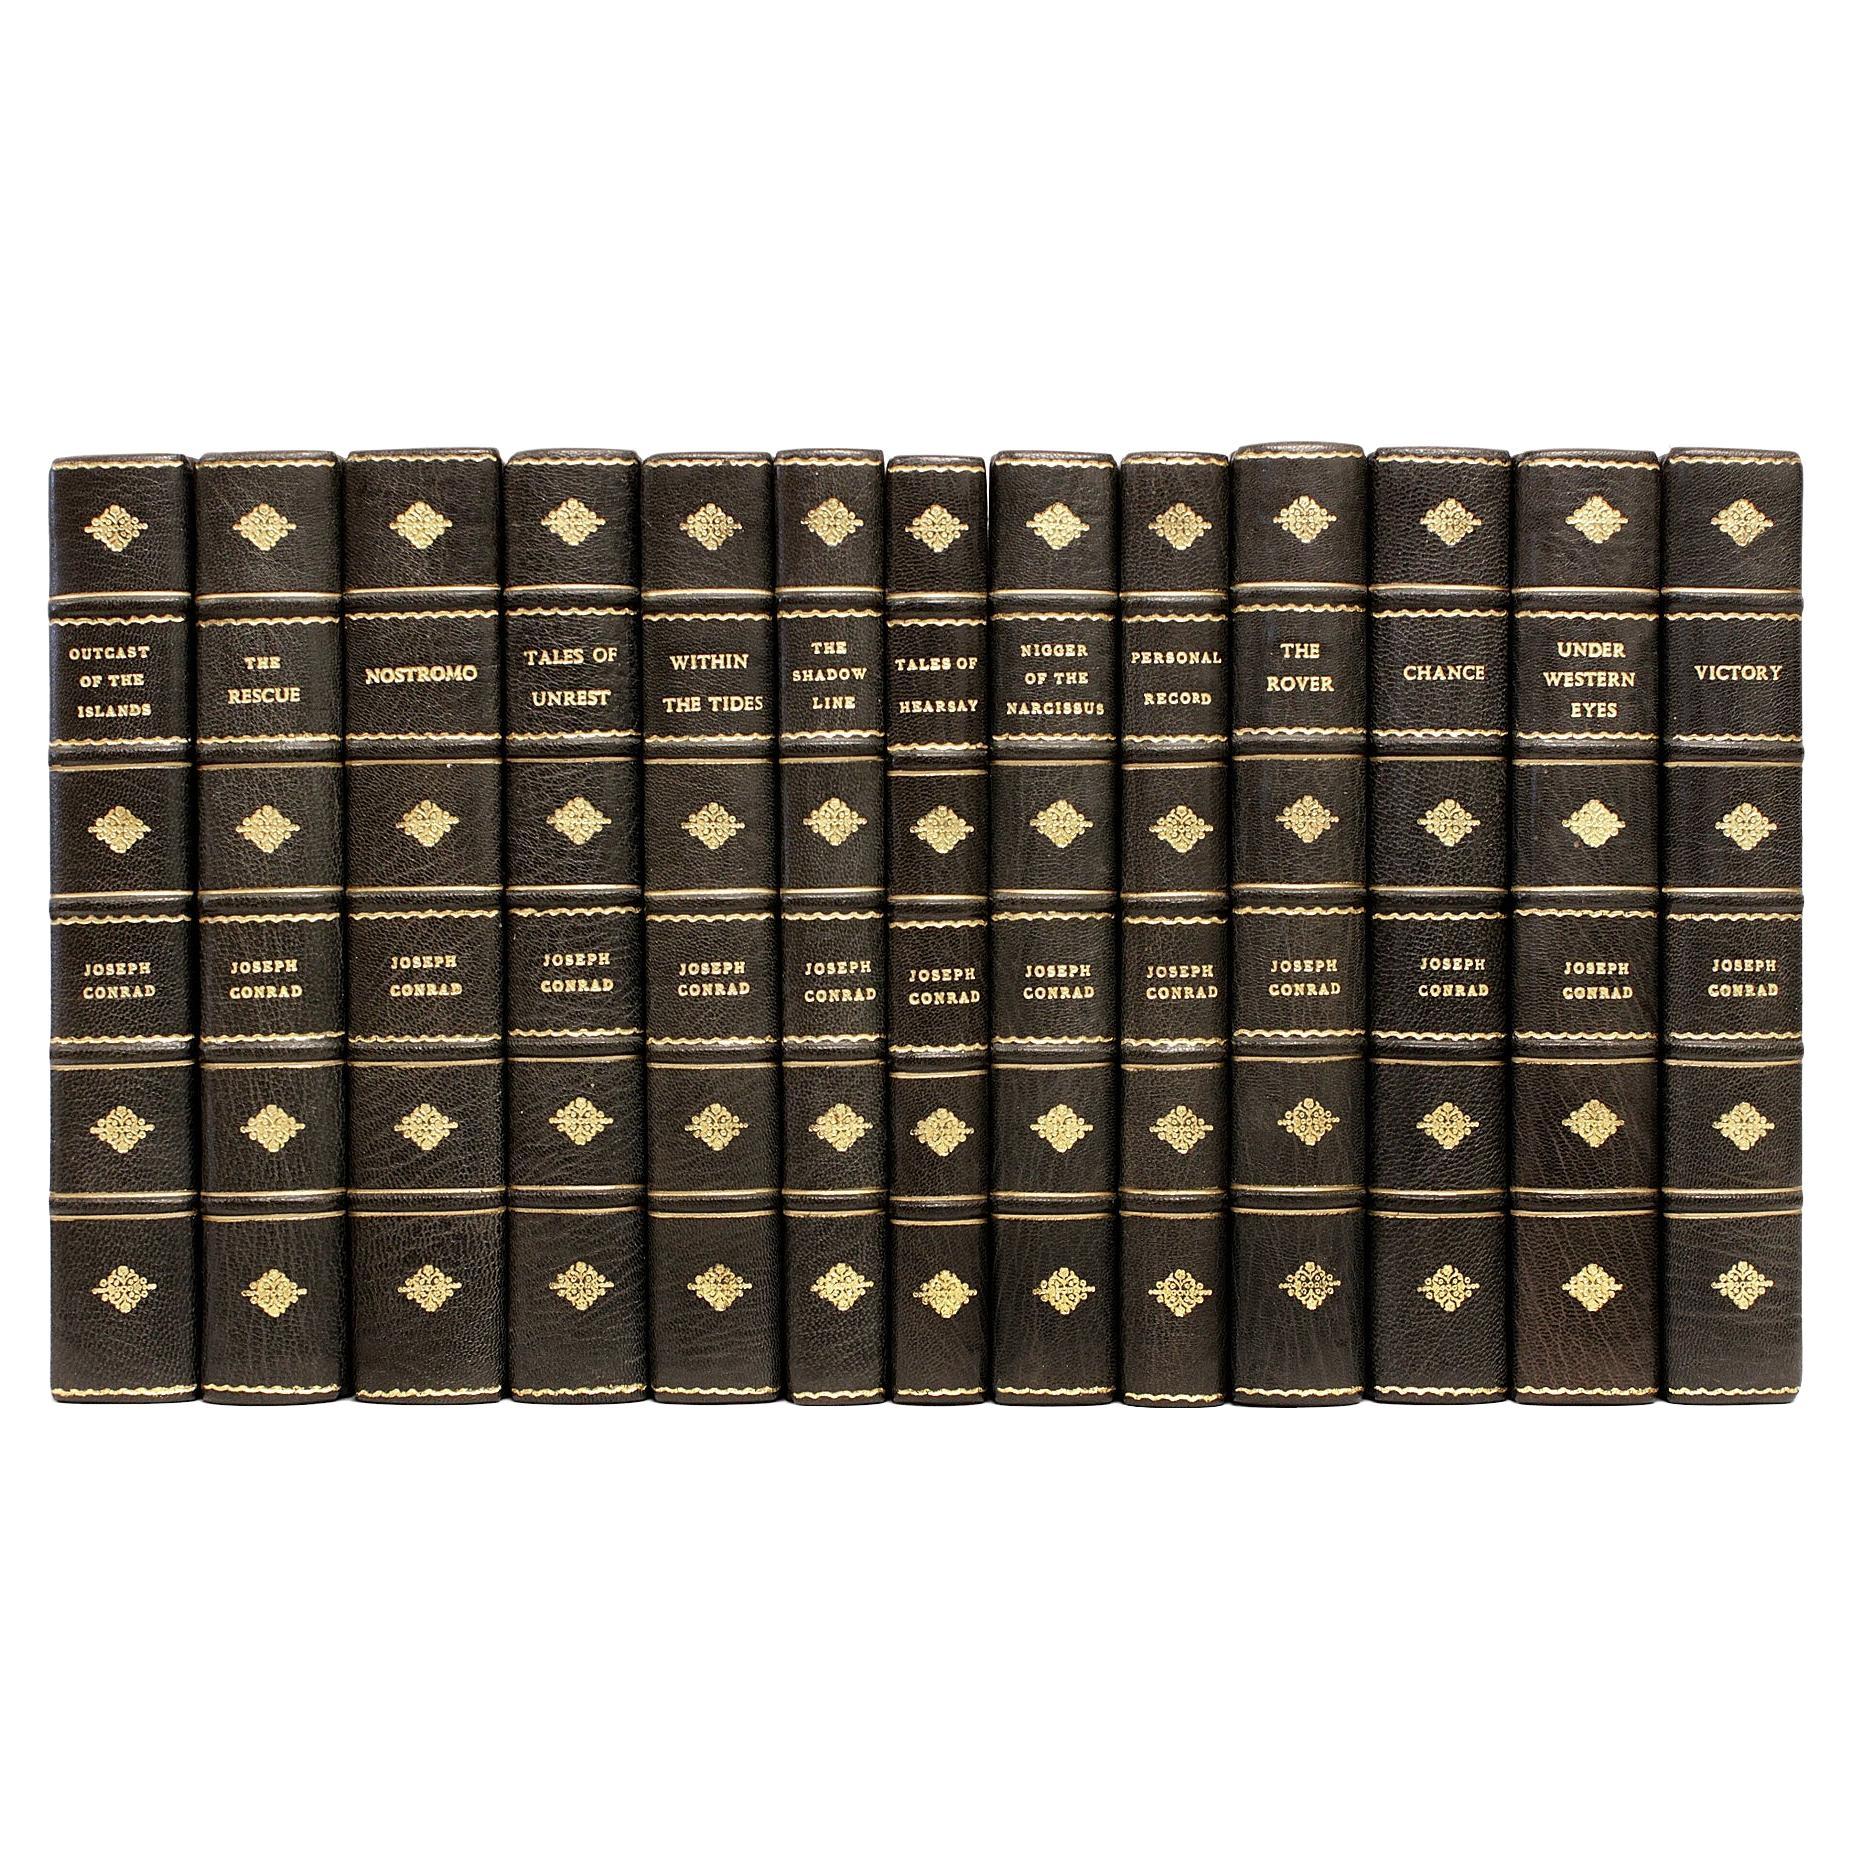 Complete Works of Joseph Conrad, 26 Volumes, in a Fine Leather Binding